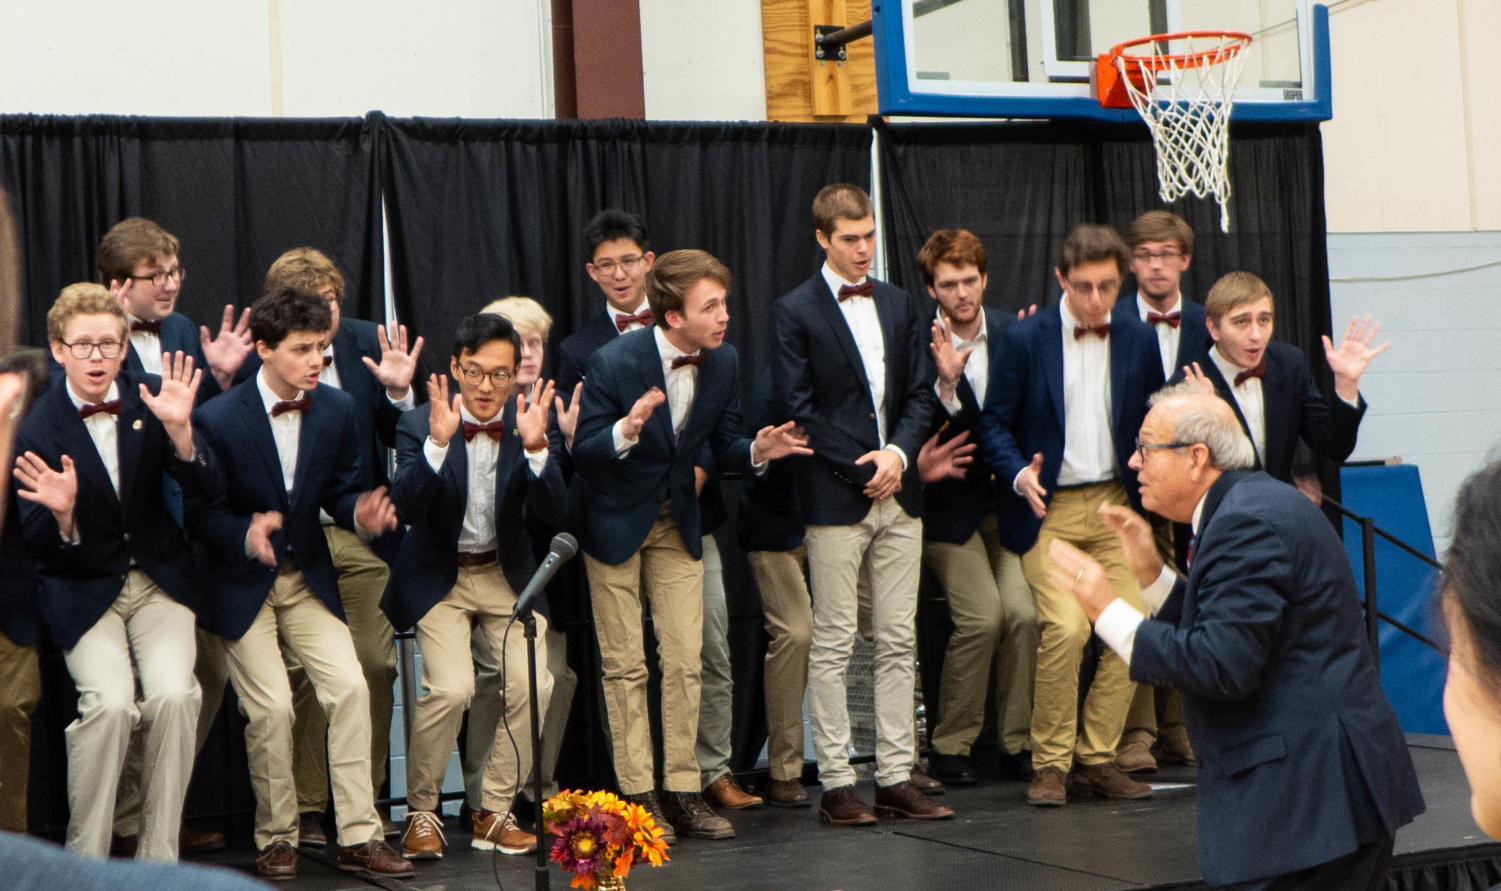 UChicago students in Chicago Men’s A Capella (CMAC) offer a lively performance at the event.